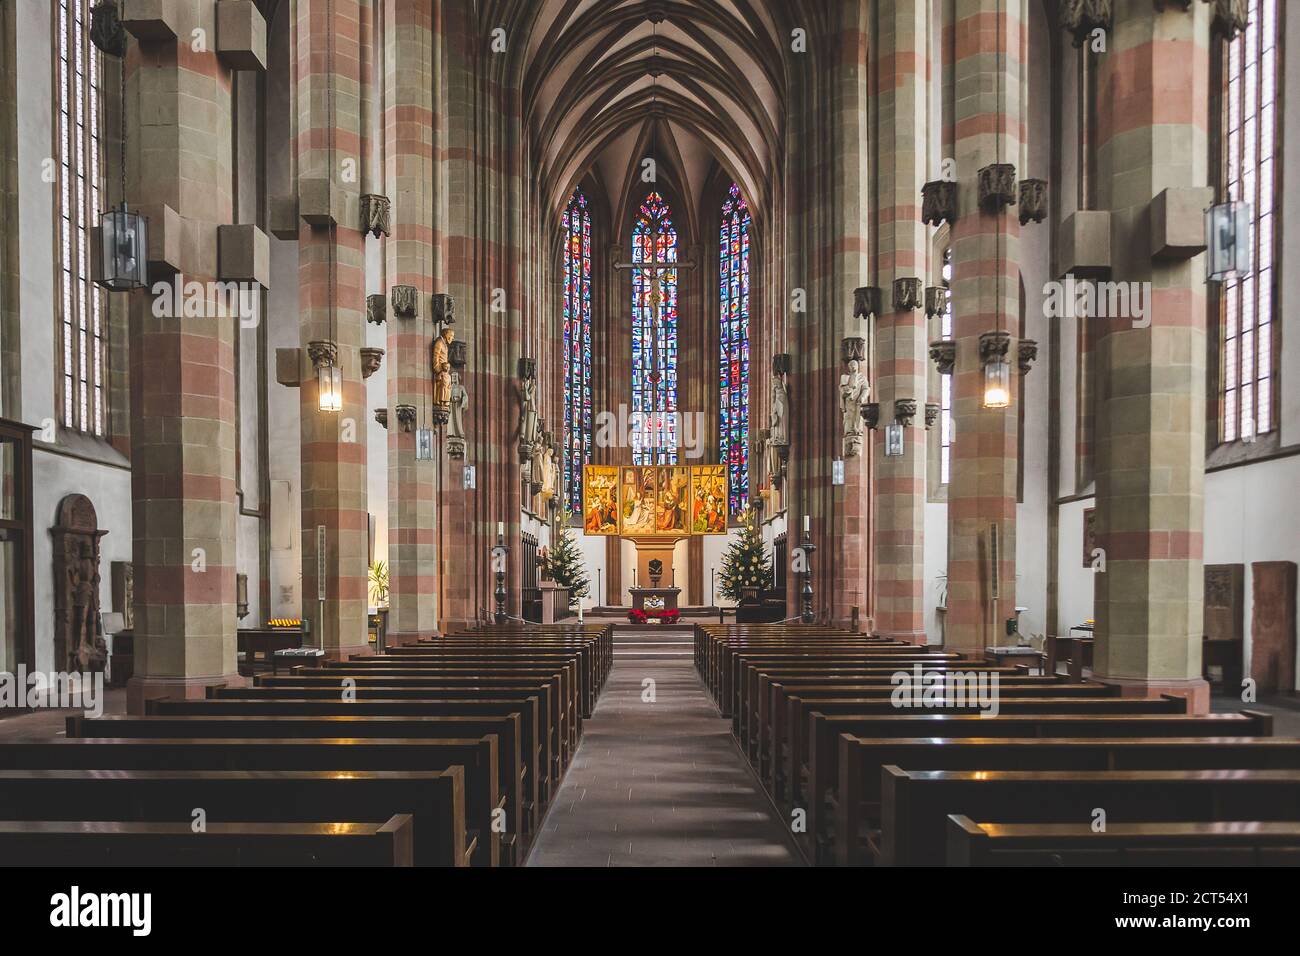 View down the nave towards the high altar inside the Marienkapelle, a Roman Catholic church located at the Unterer Markt (market square) of the town o Stock Photo